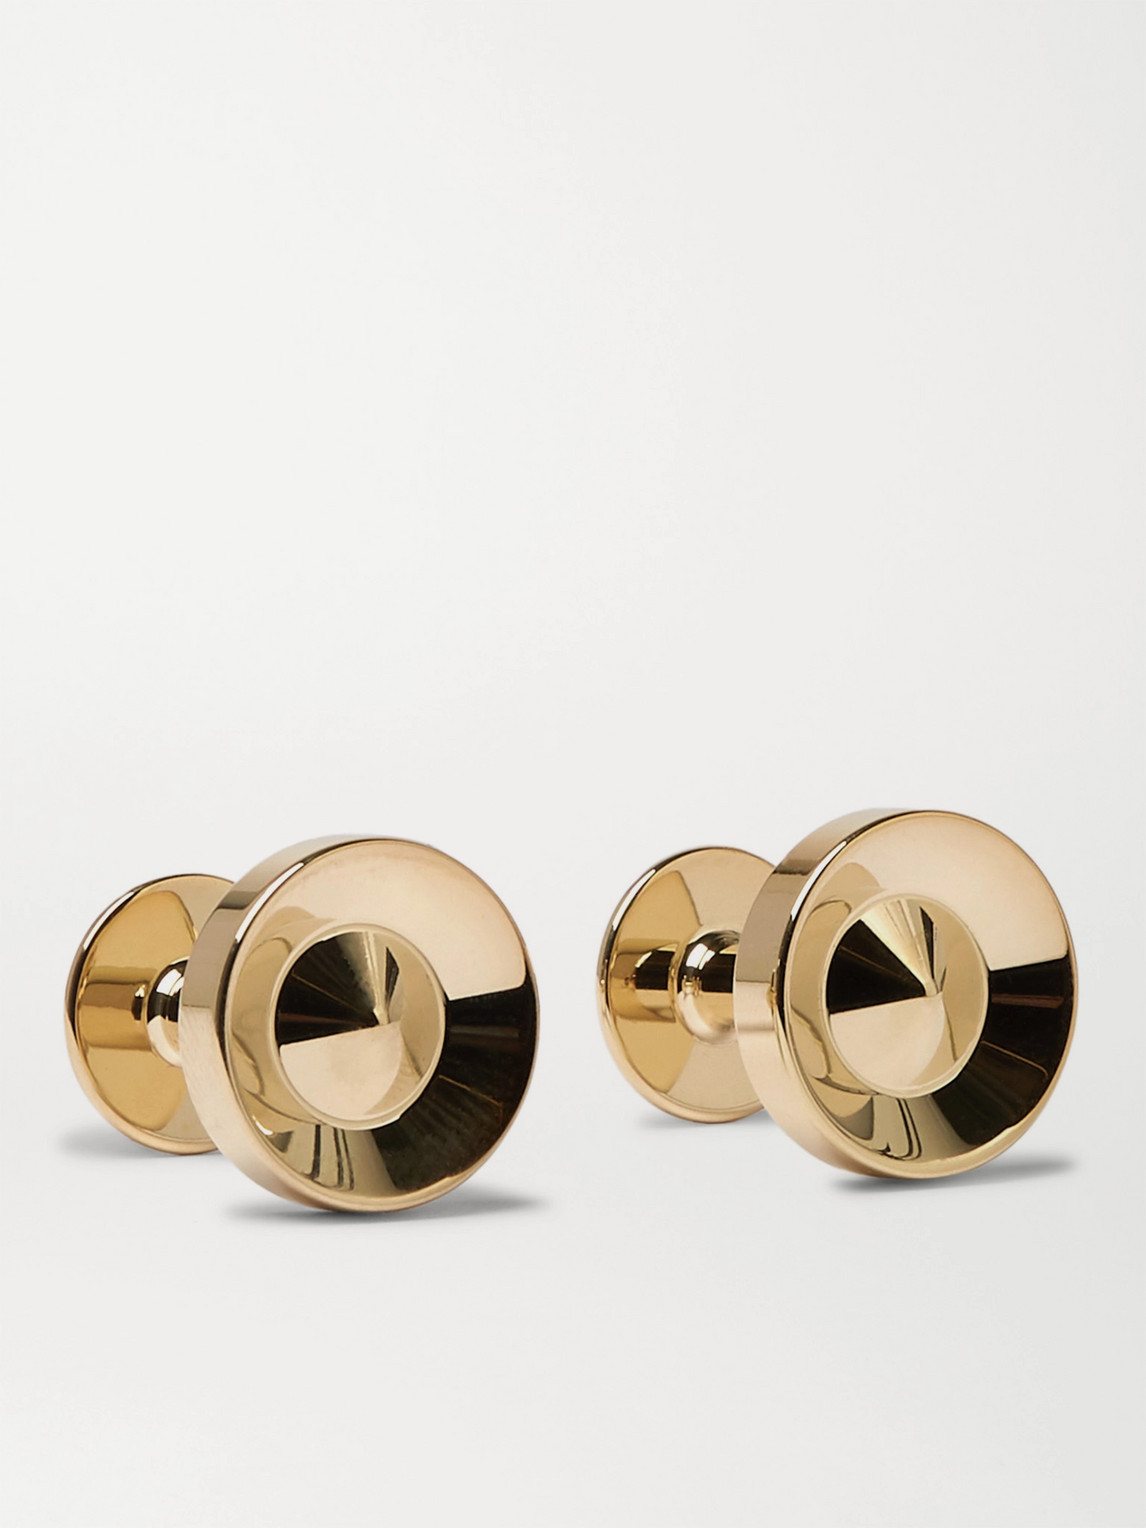 Alice Made This Alvar Gold-plated Cufflinks